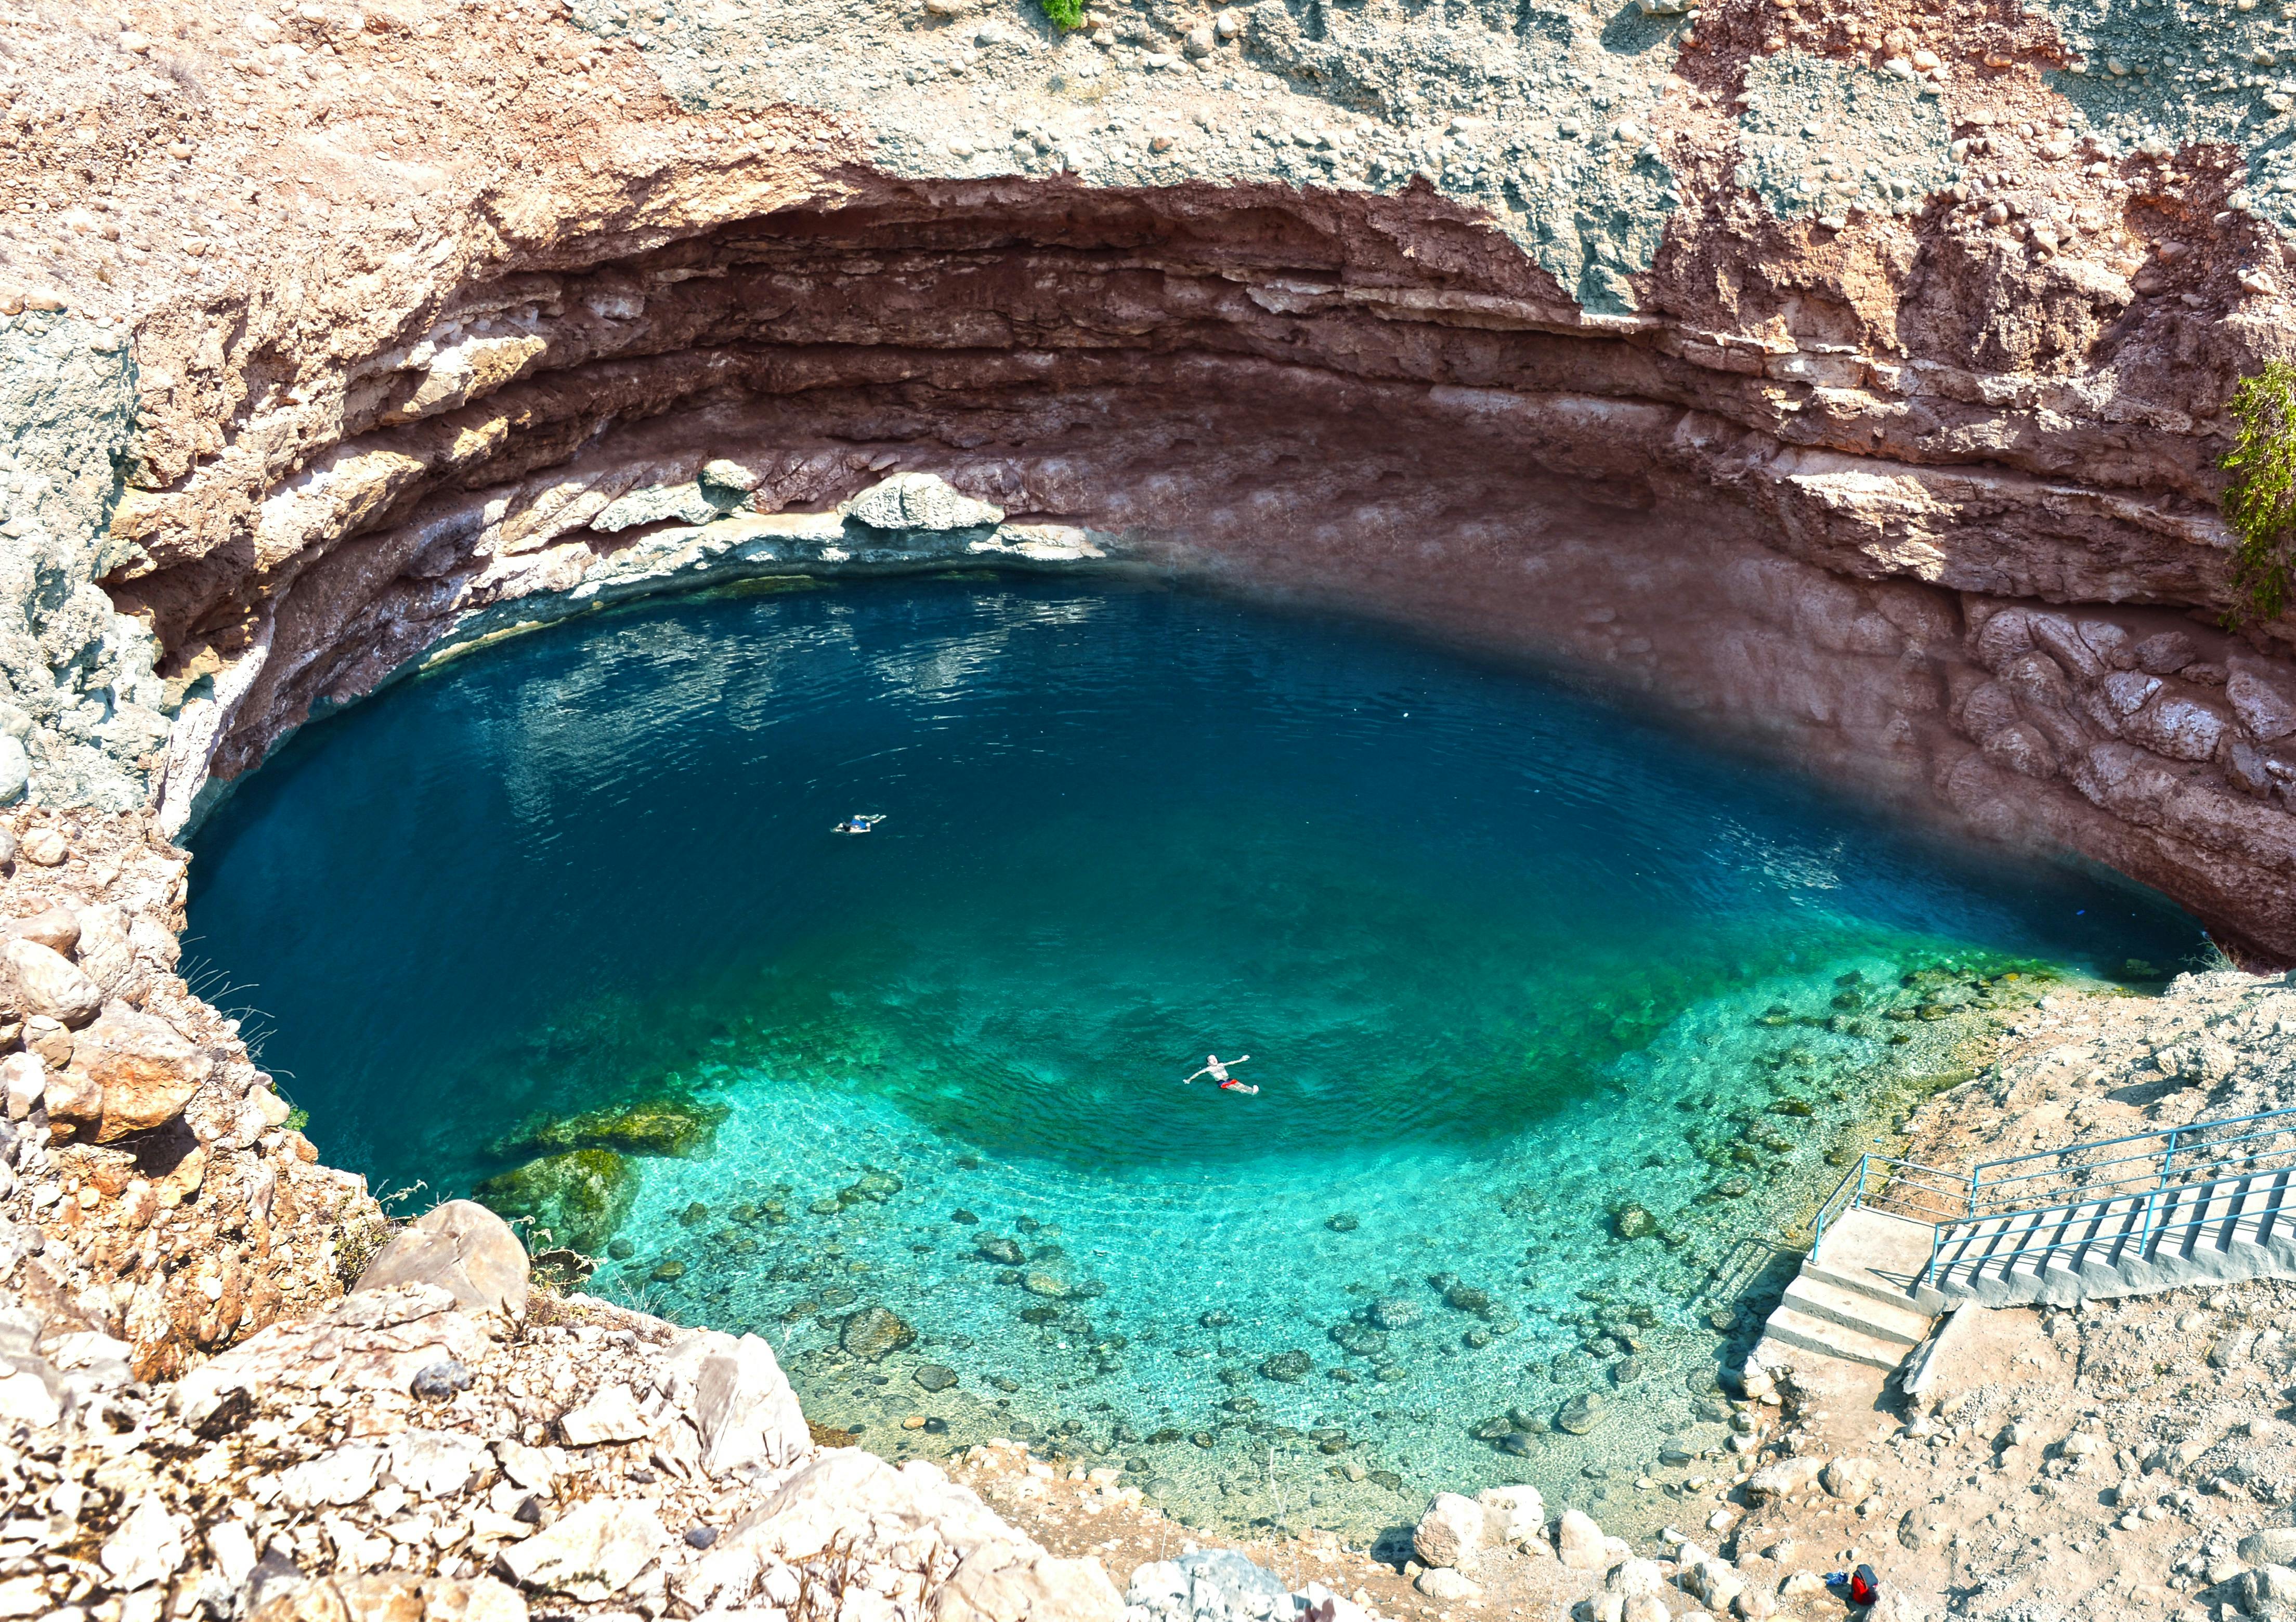 Private guided tour to Sinkhole and Wadi from Muscat Musement